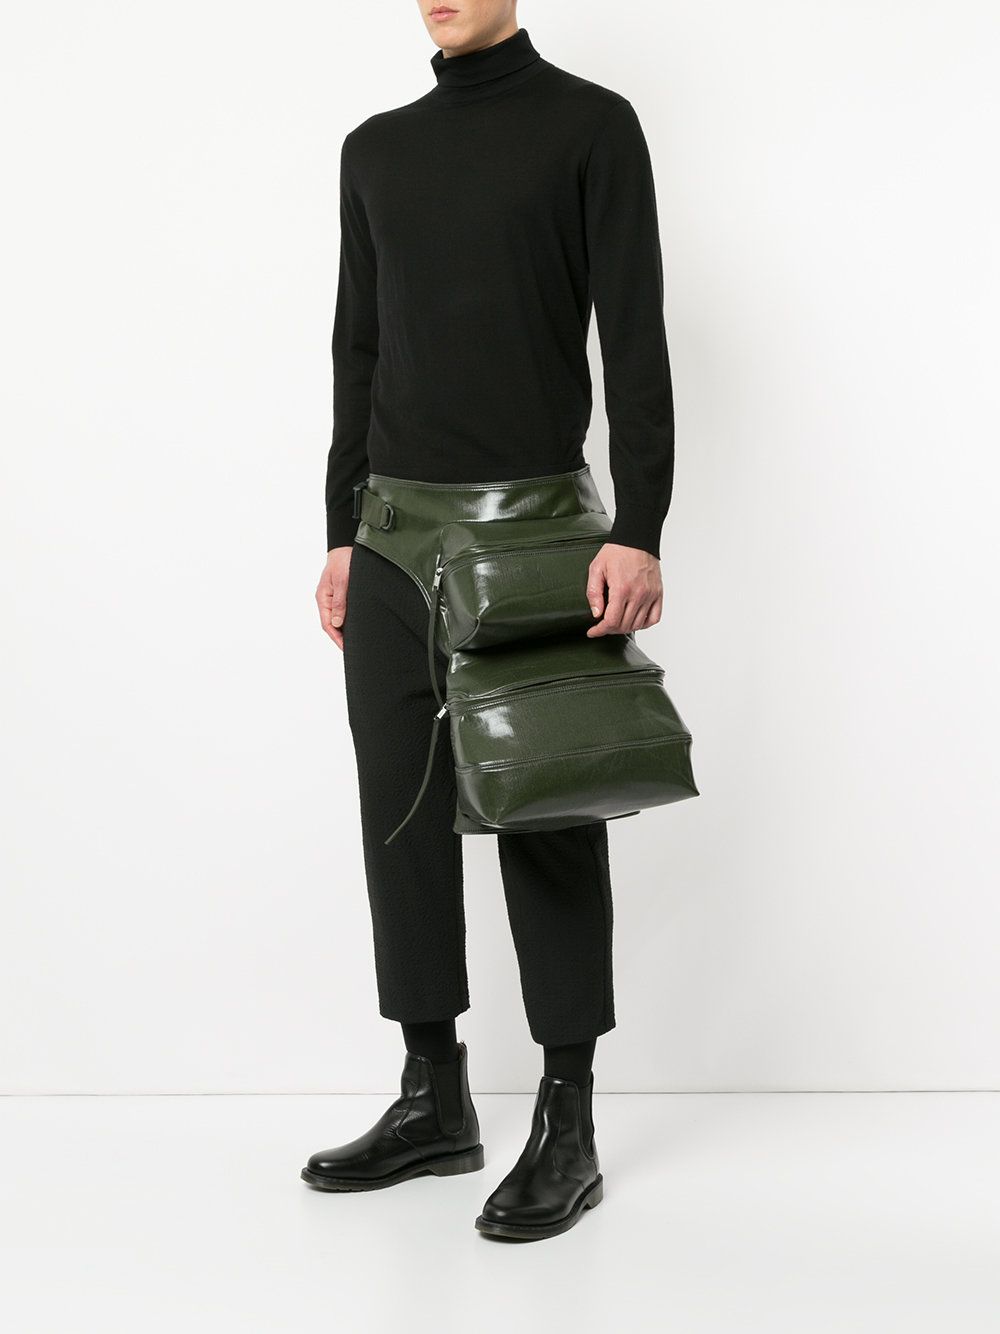 The new drop of cargo bags by designer Rick Owens - ICON